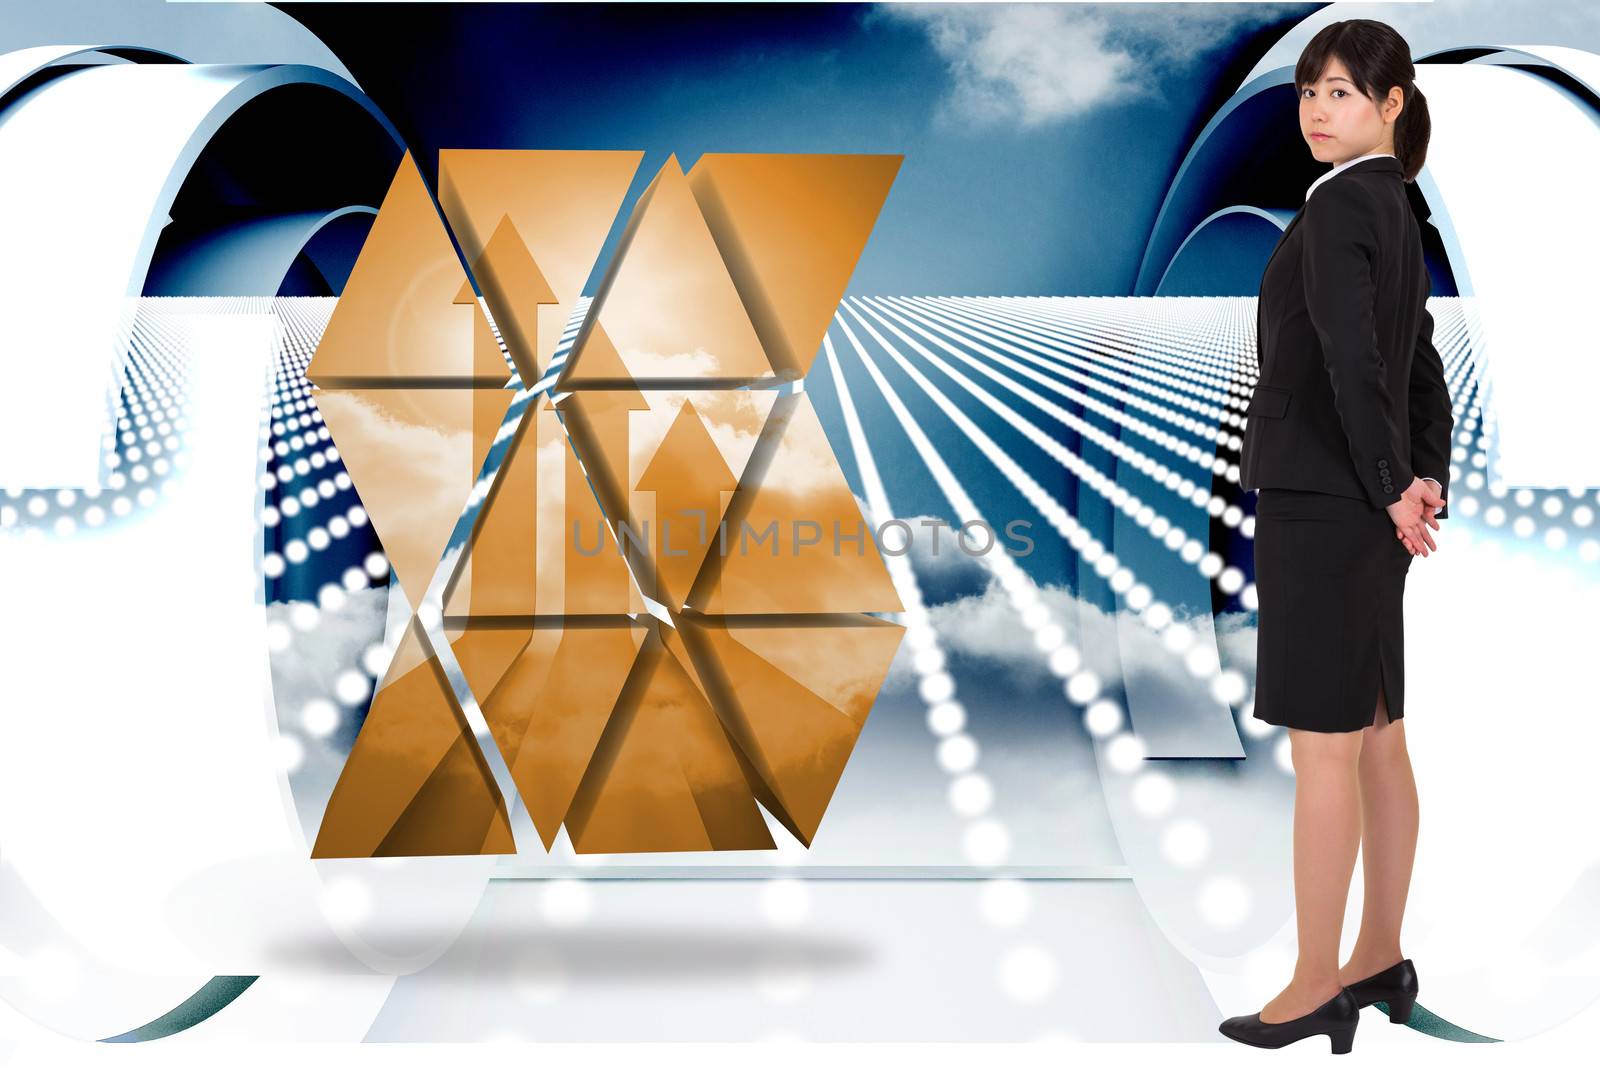 Composite image of serious businesswoman by Wavebreakmedia